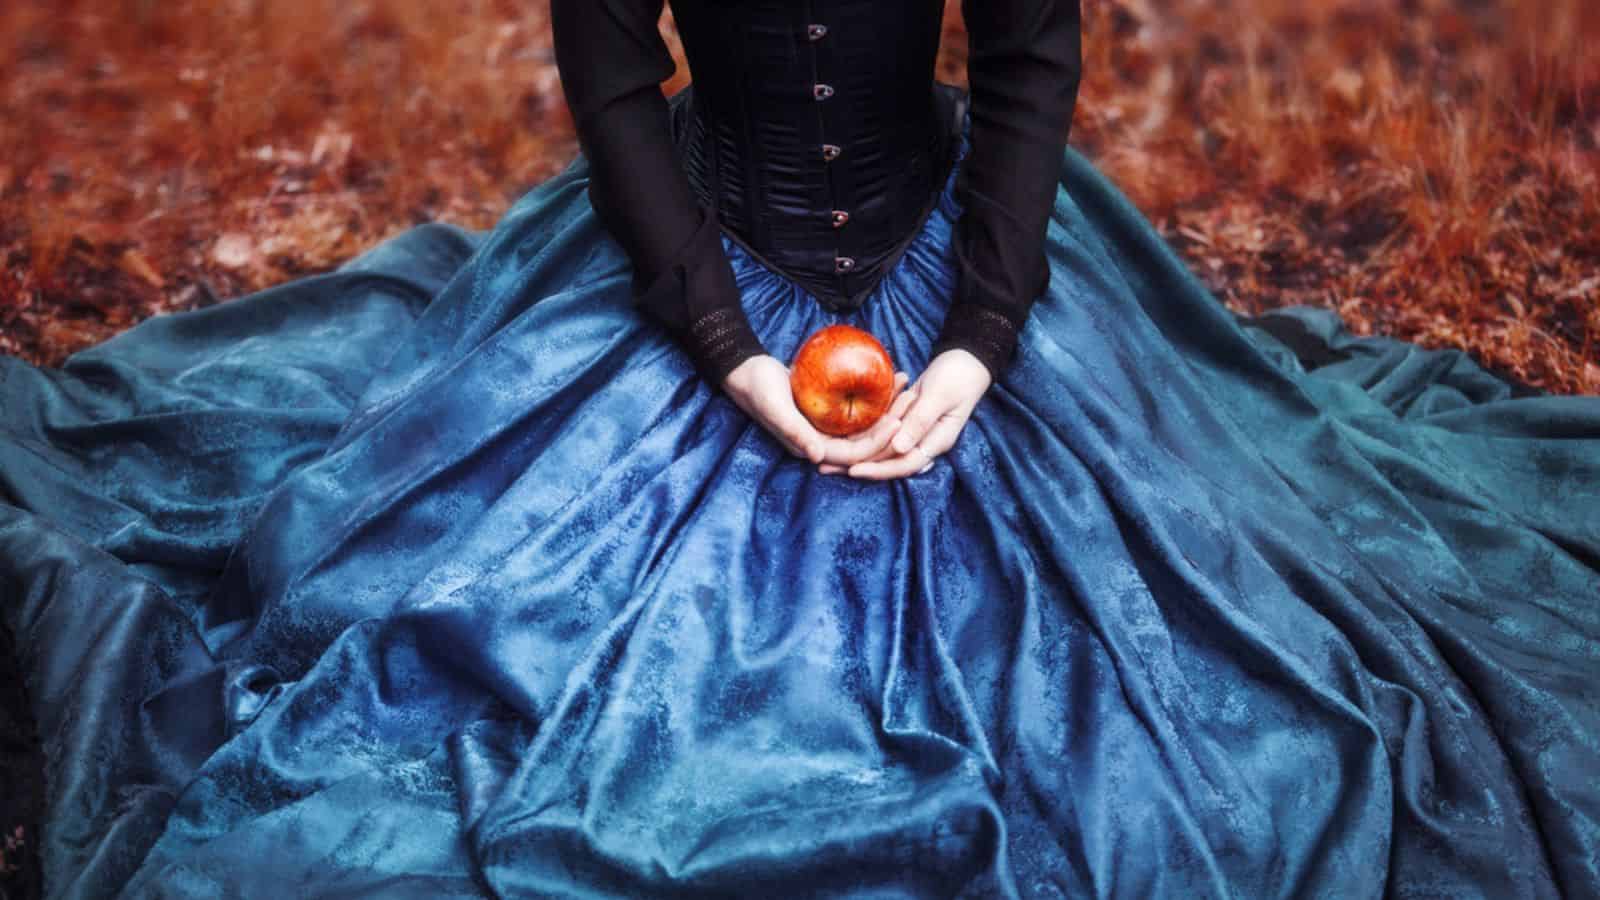 Snow White princess with the famous red apple